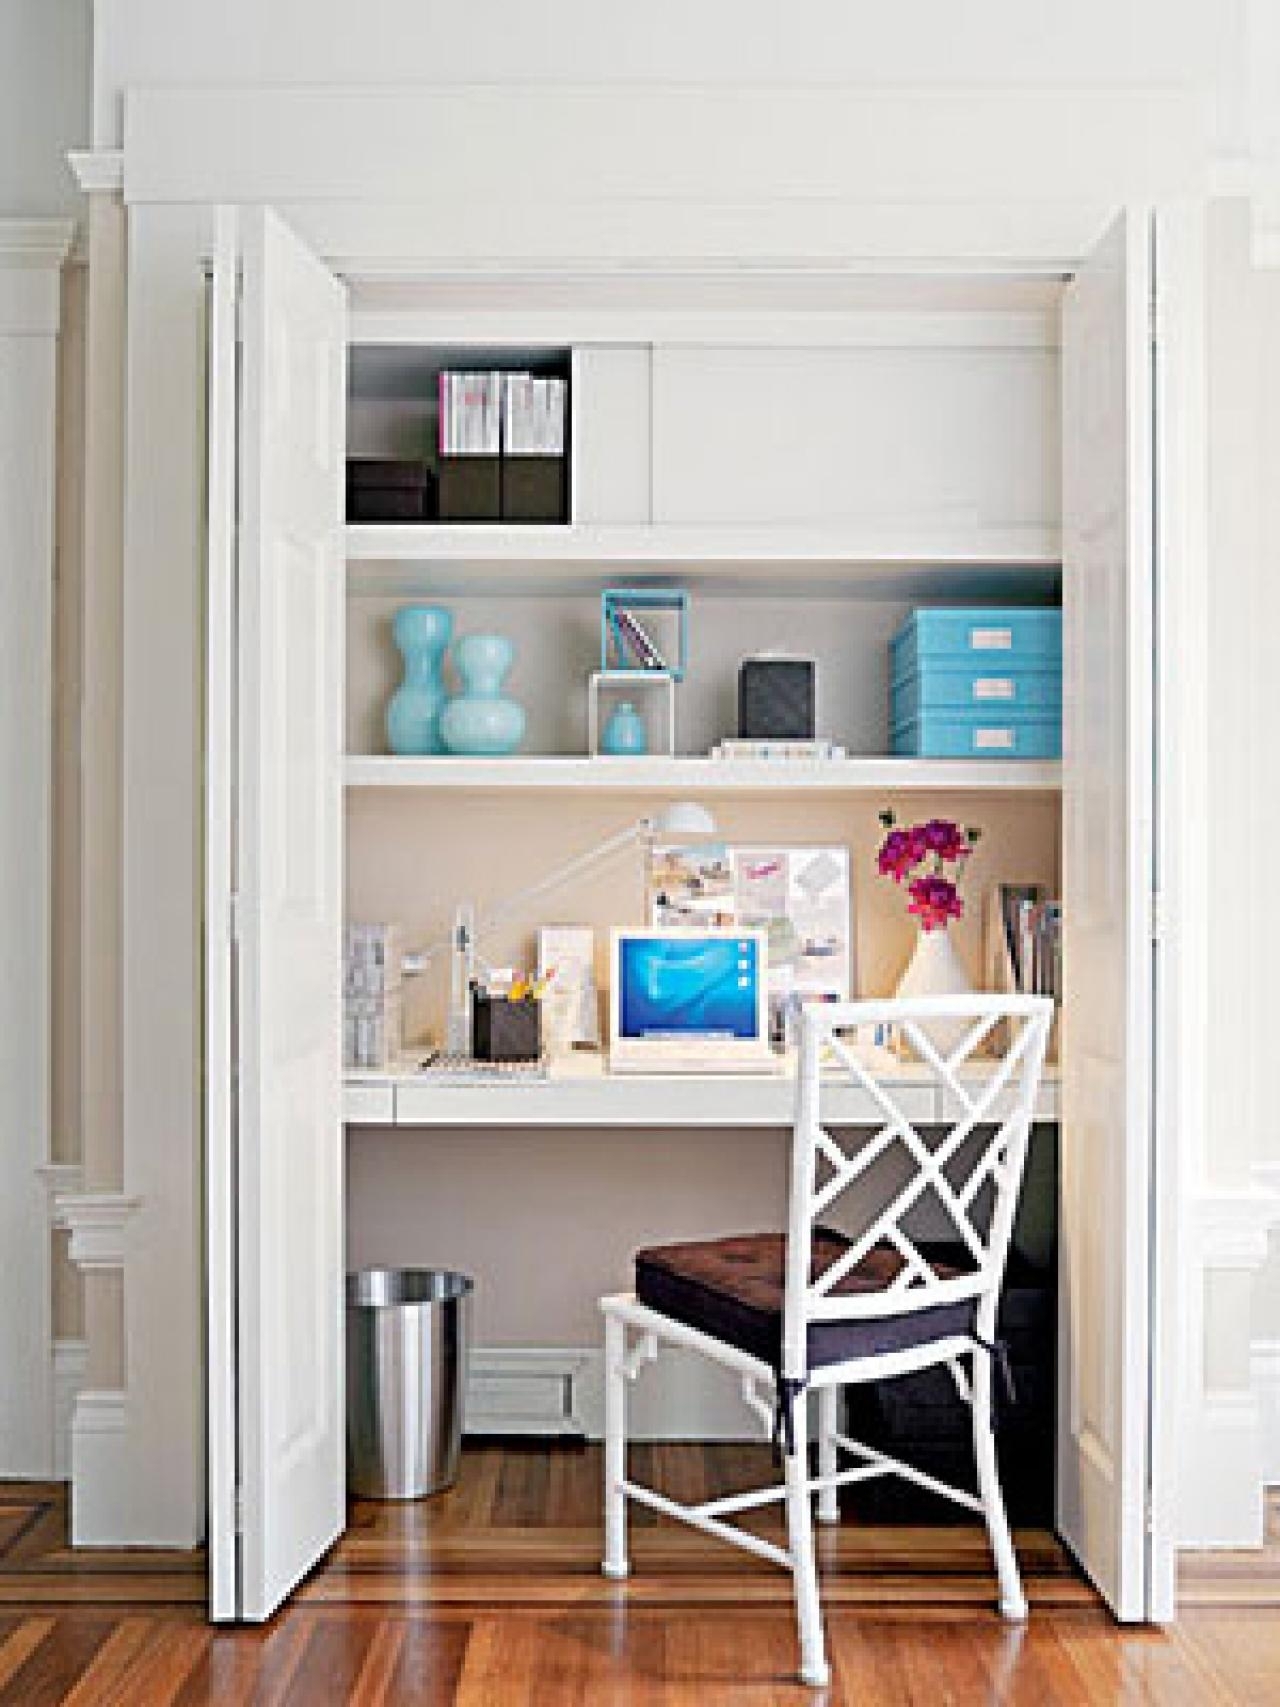 10 Stunning Home Office Ideas Small Spaces %name 2022